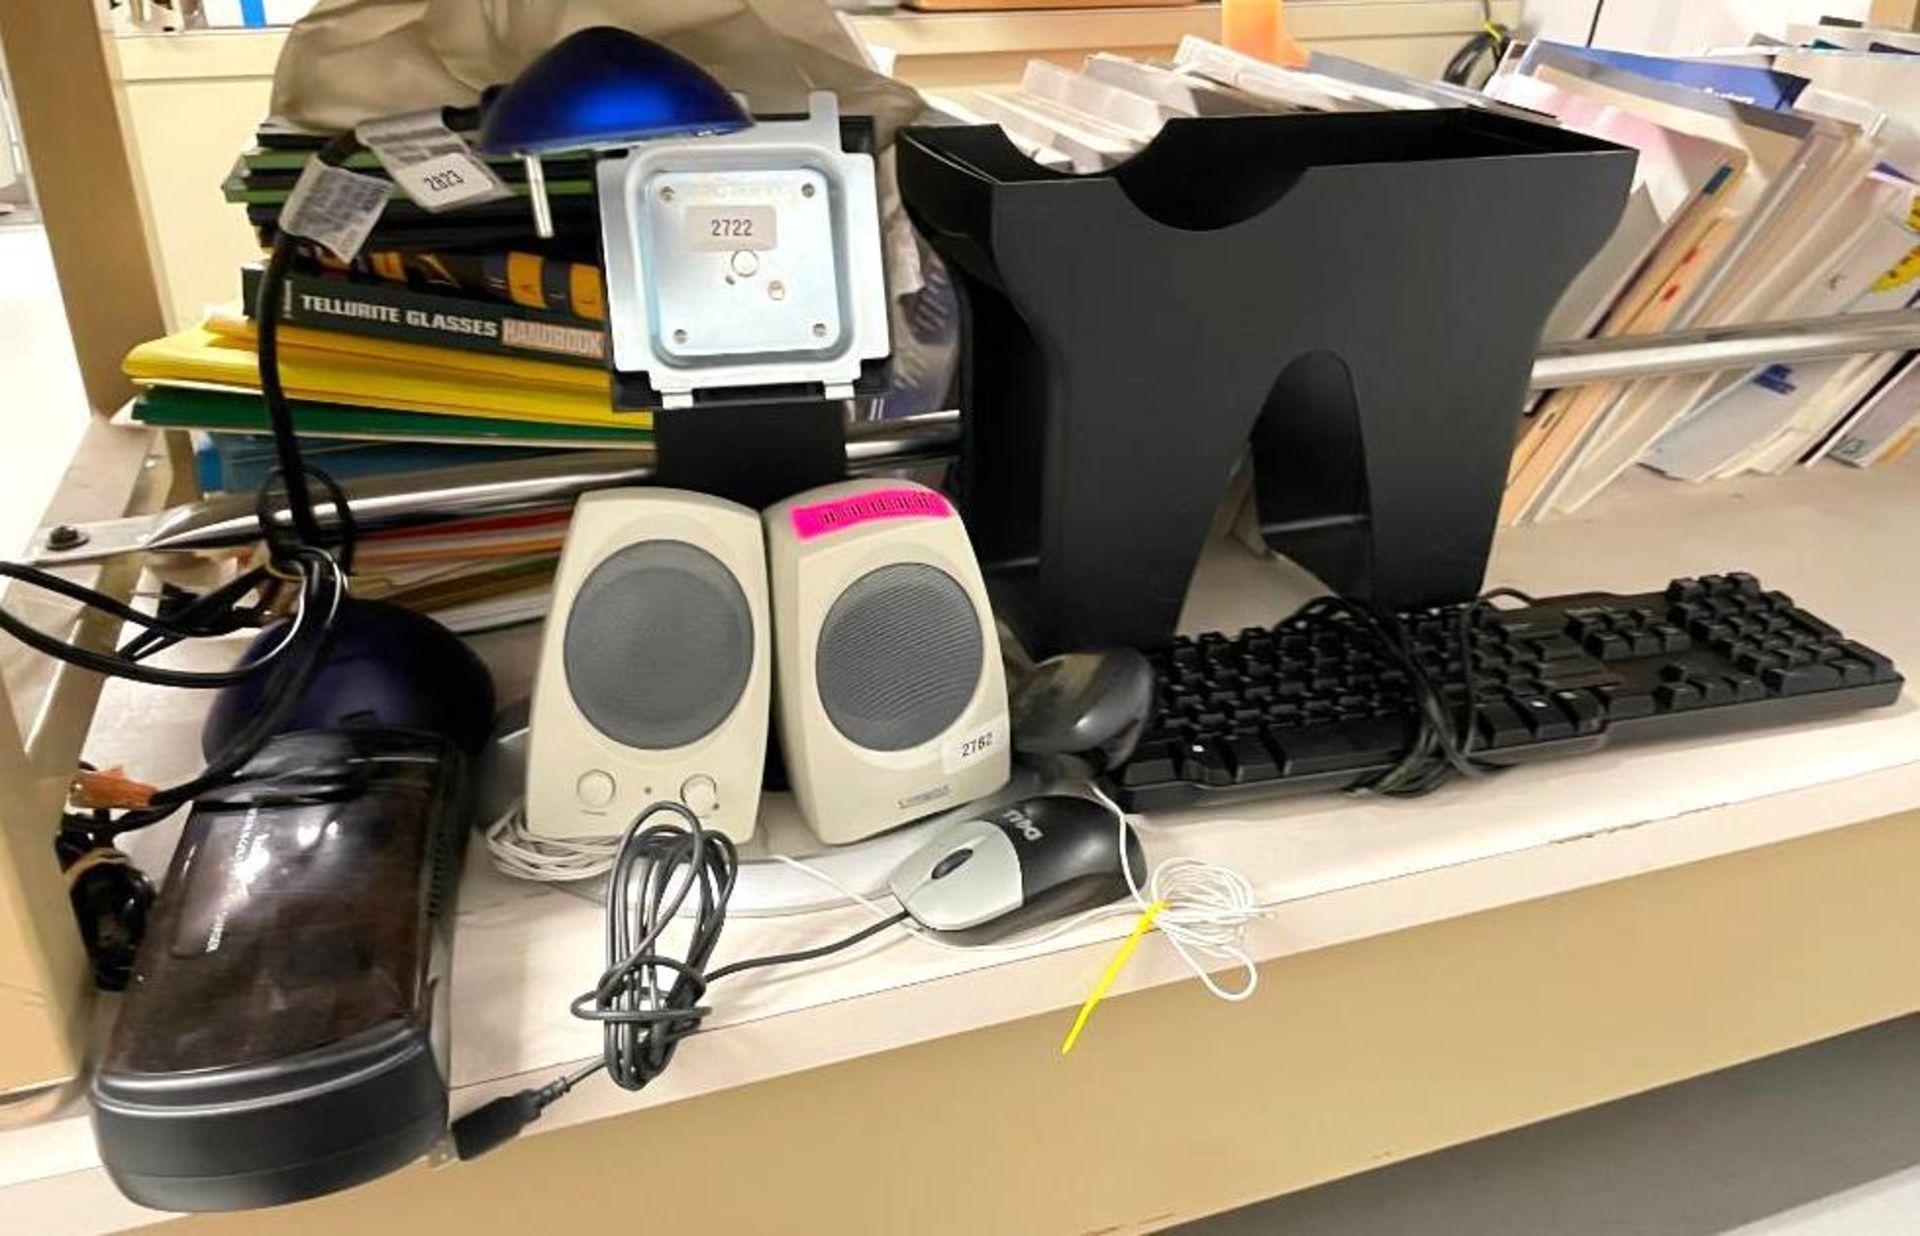 ASSORTED OFFICE SUPPLIES AS SHOWN INFORMATION: (CHARGER, SPEAKERS, DESK LIGHT, KEYBOARD, ETC.) QTY: